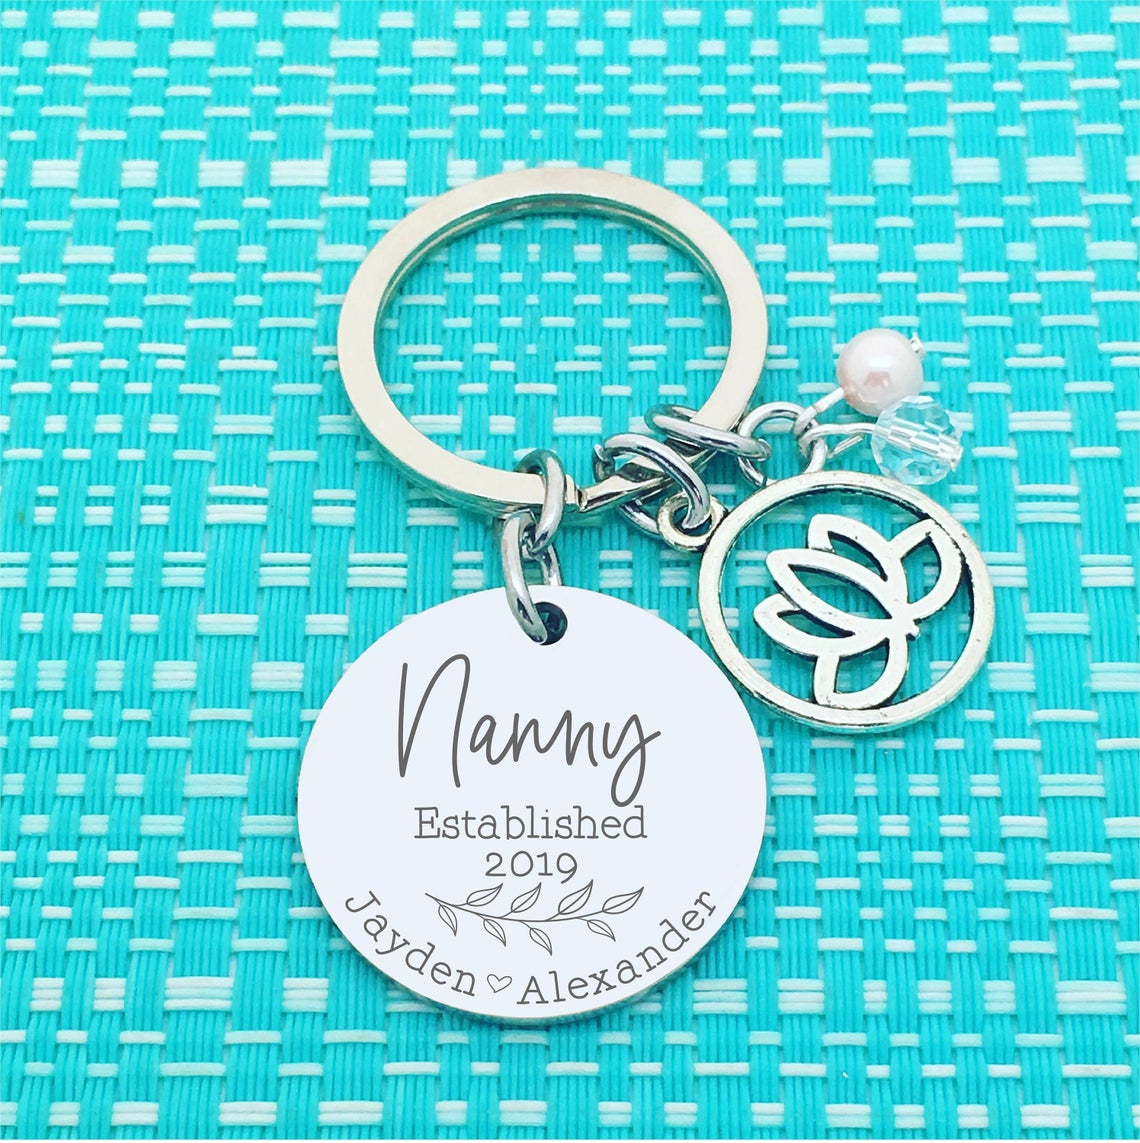 Nanny Established Personalised Keyring Lotus Charm Design (Change Nanny to another name of your choosing)